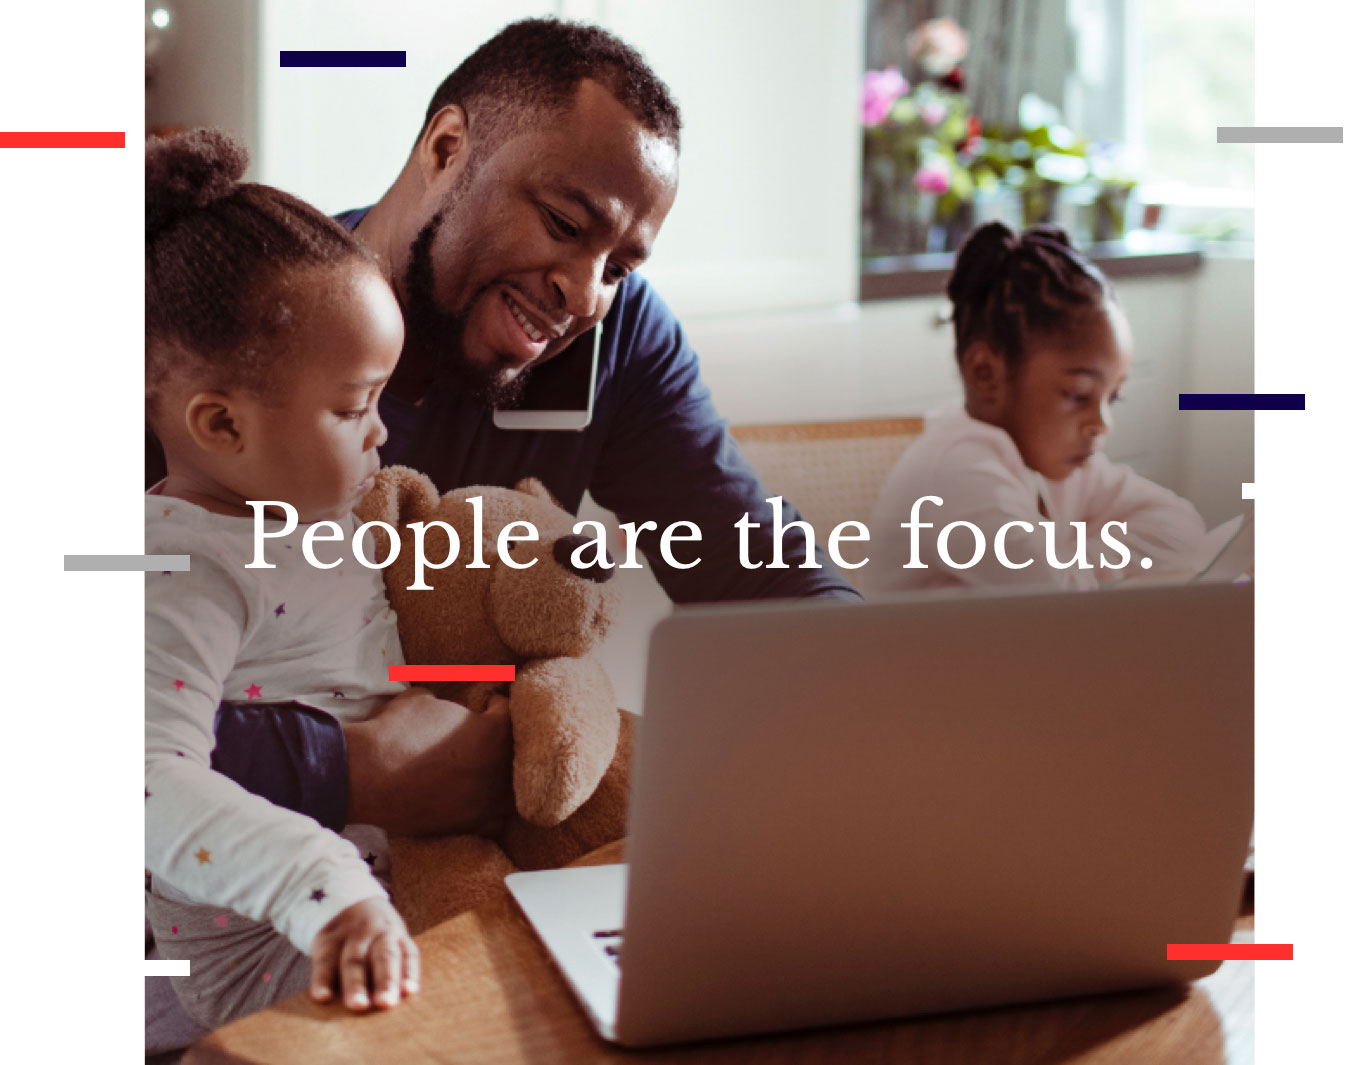 Graphic from the Franklin Madison website design that says "People are the focus."